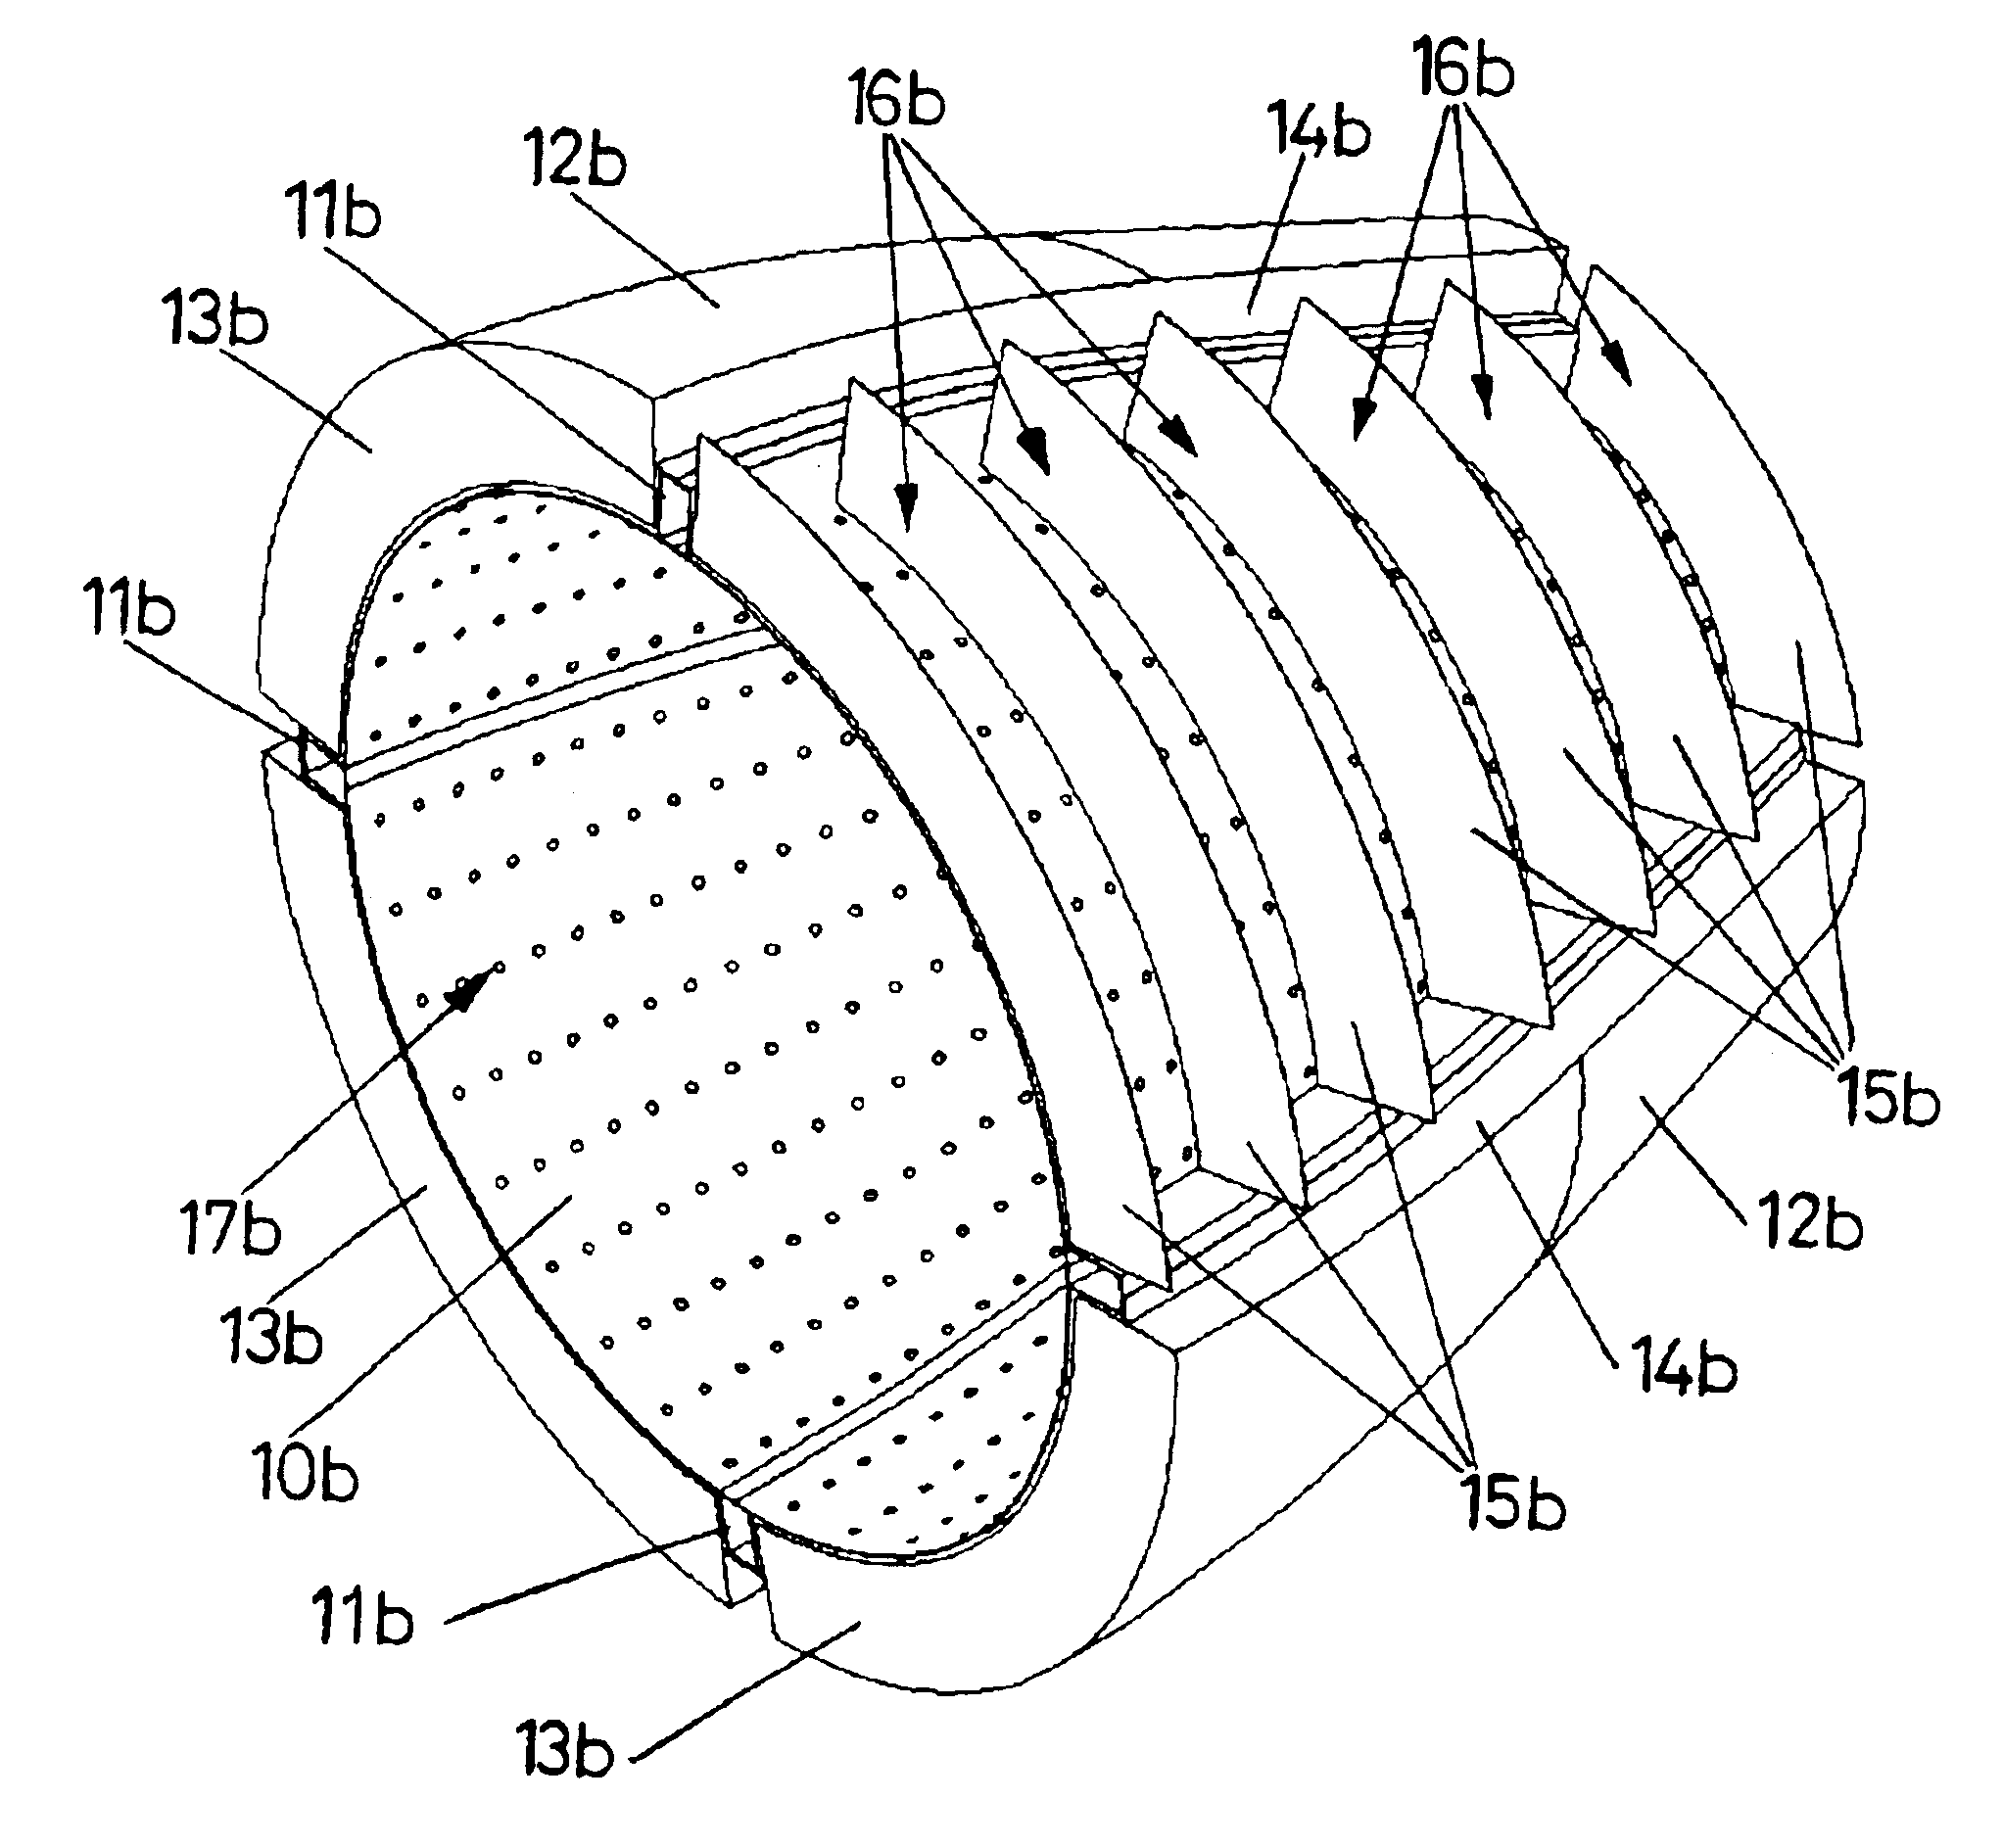 Noise reduction conduit for static components in aircraft engines